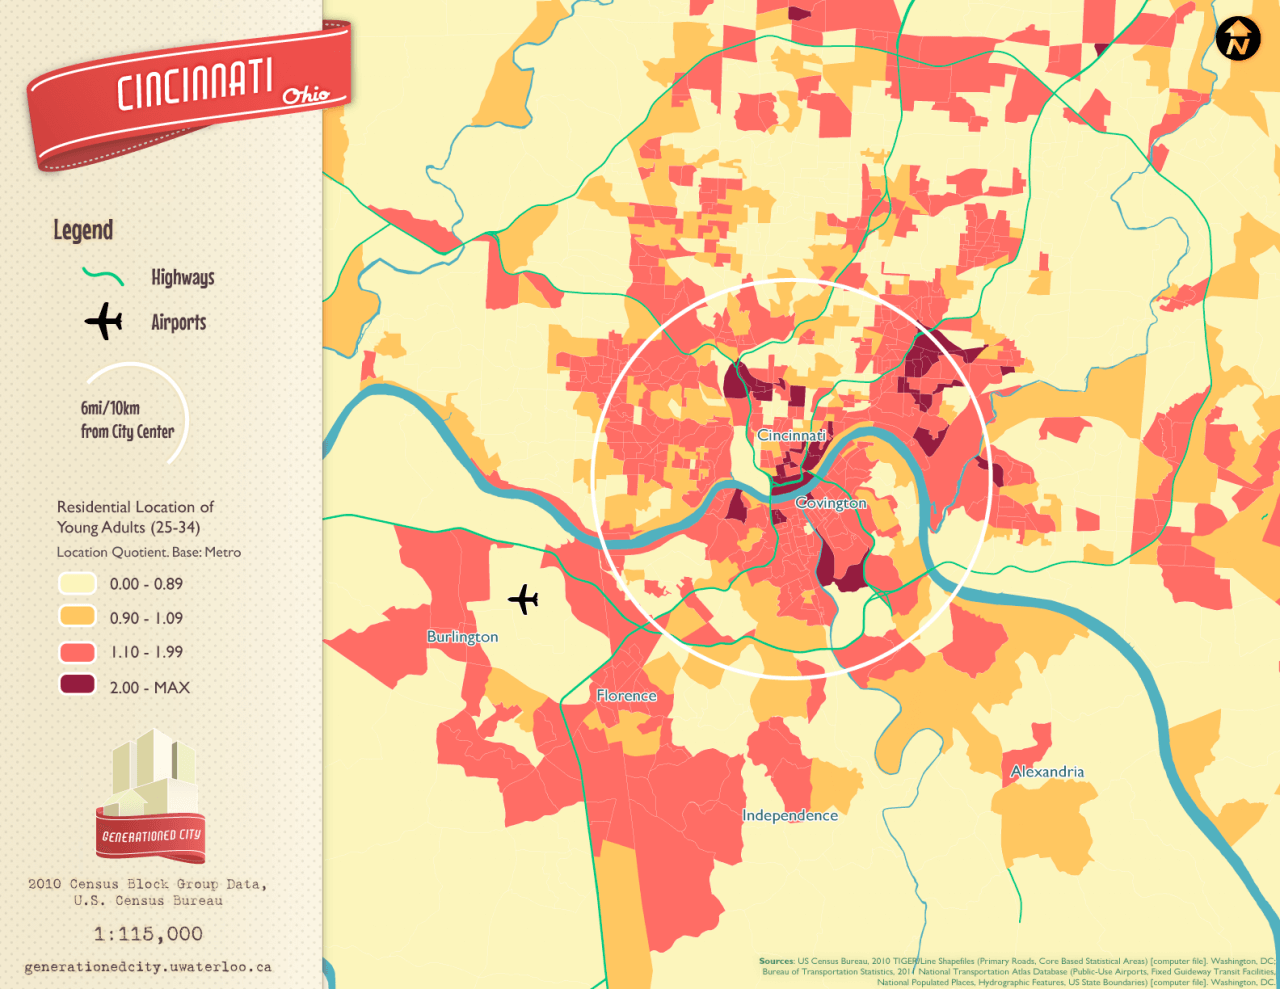 Residential location of young adults in Cincinnati.